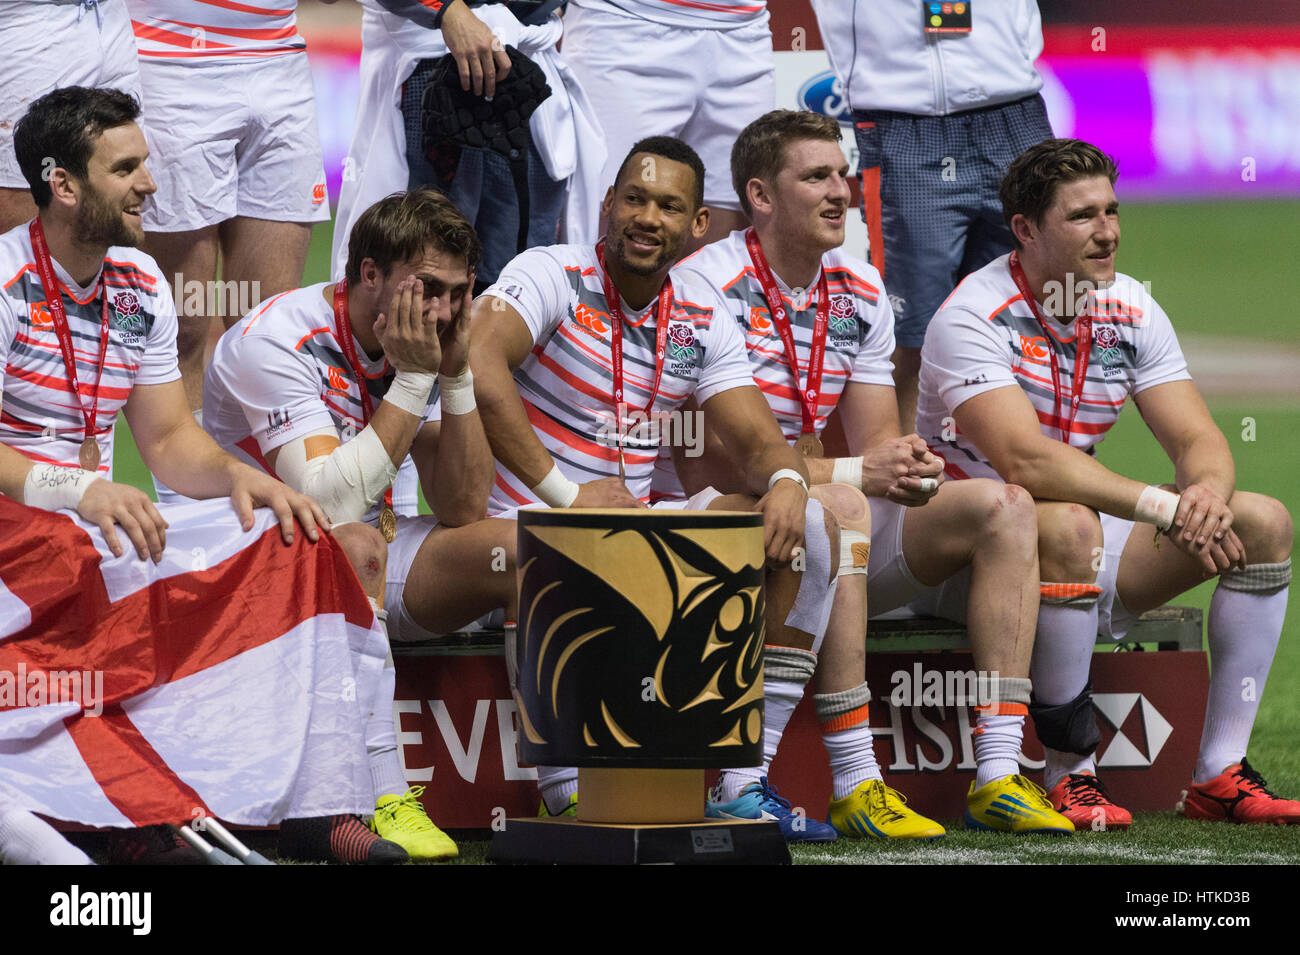 Vancouver, Canada. 12th Mar, 2017.  England players are sitting around their trophy, a First Nations Native carved bowl. Day 2-HSBC Canada Sevens Rugby Cup Final.BC Place Stadium. England wins the gold by defeating South Africa 19 -7. Credit: Gerry Rousseau/Alamy Live News Stock Photo